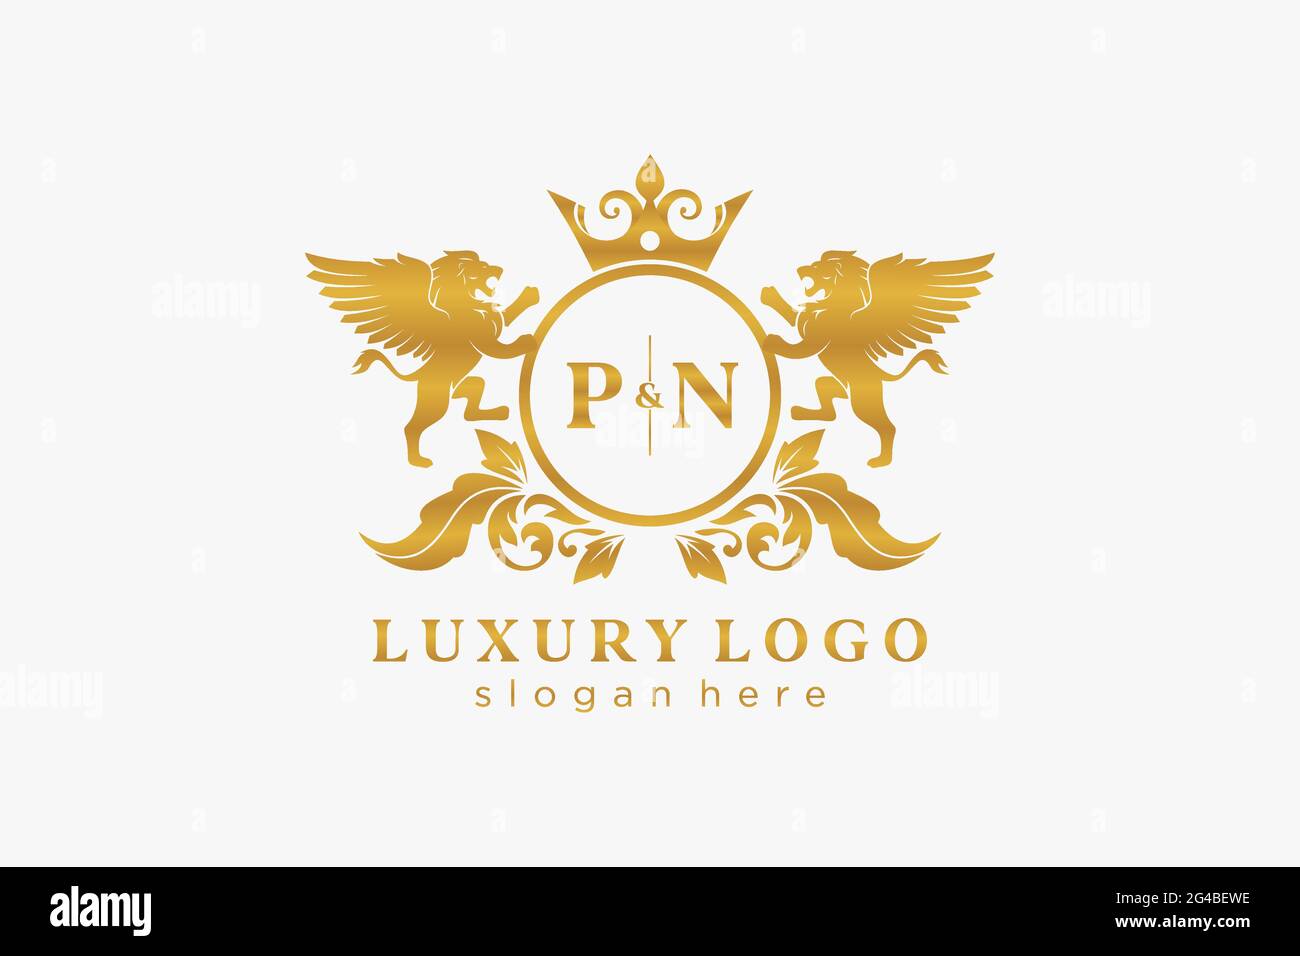 PN Letter Lion Royal Luxury Logo template in vector art for Restaurant, Royalty, Boutique, Cafe, Hotel, Heraldic, Jewelry, Fashion and other vector il Stock Vector